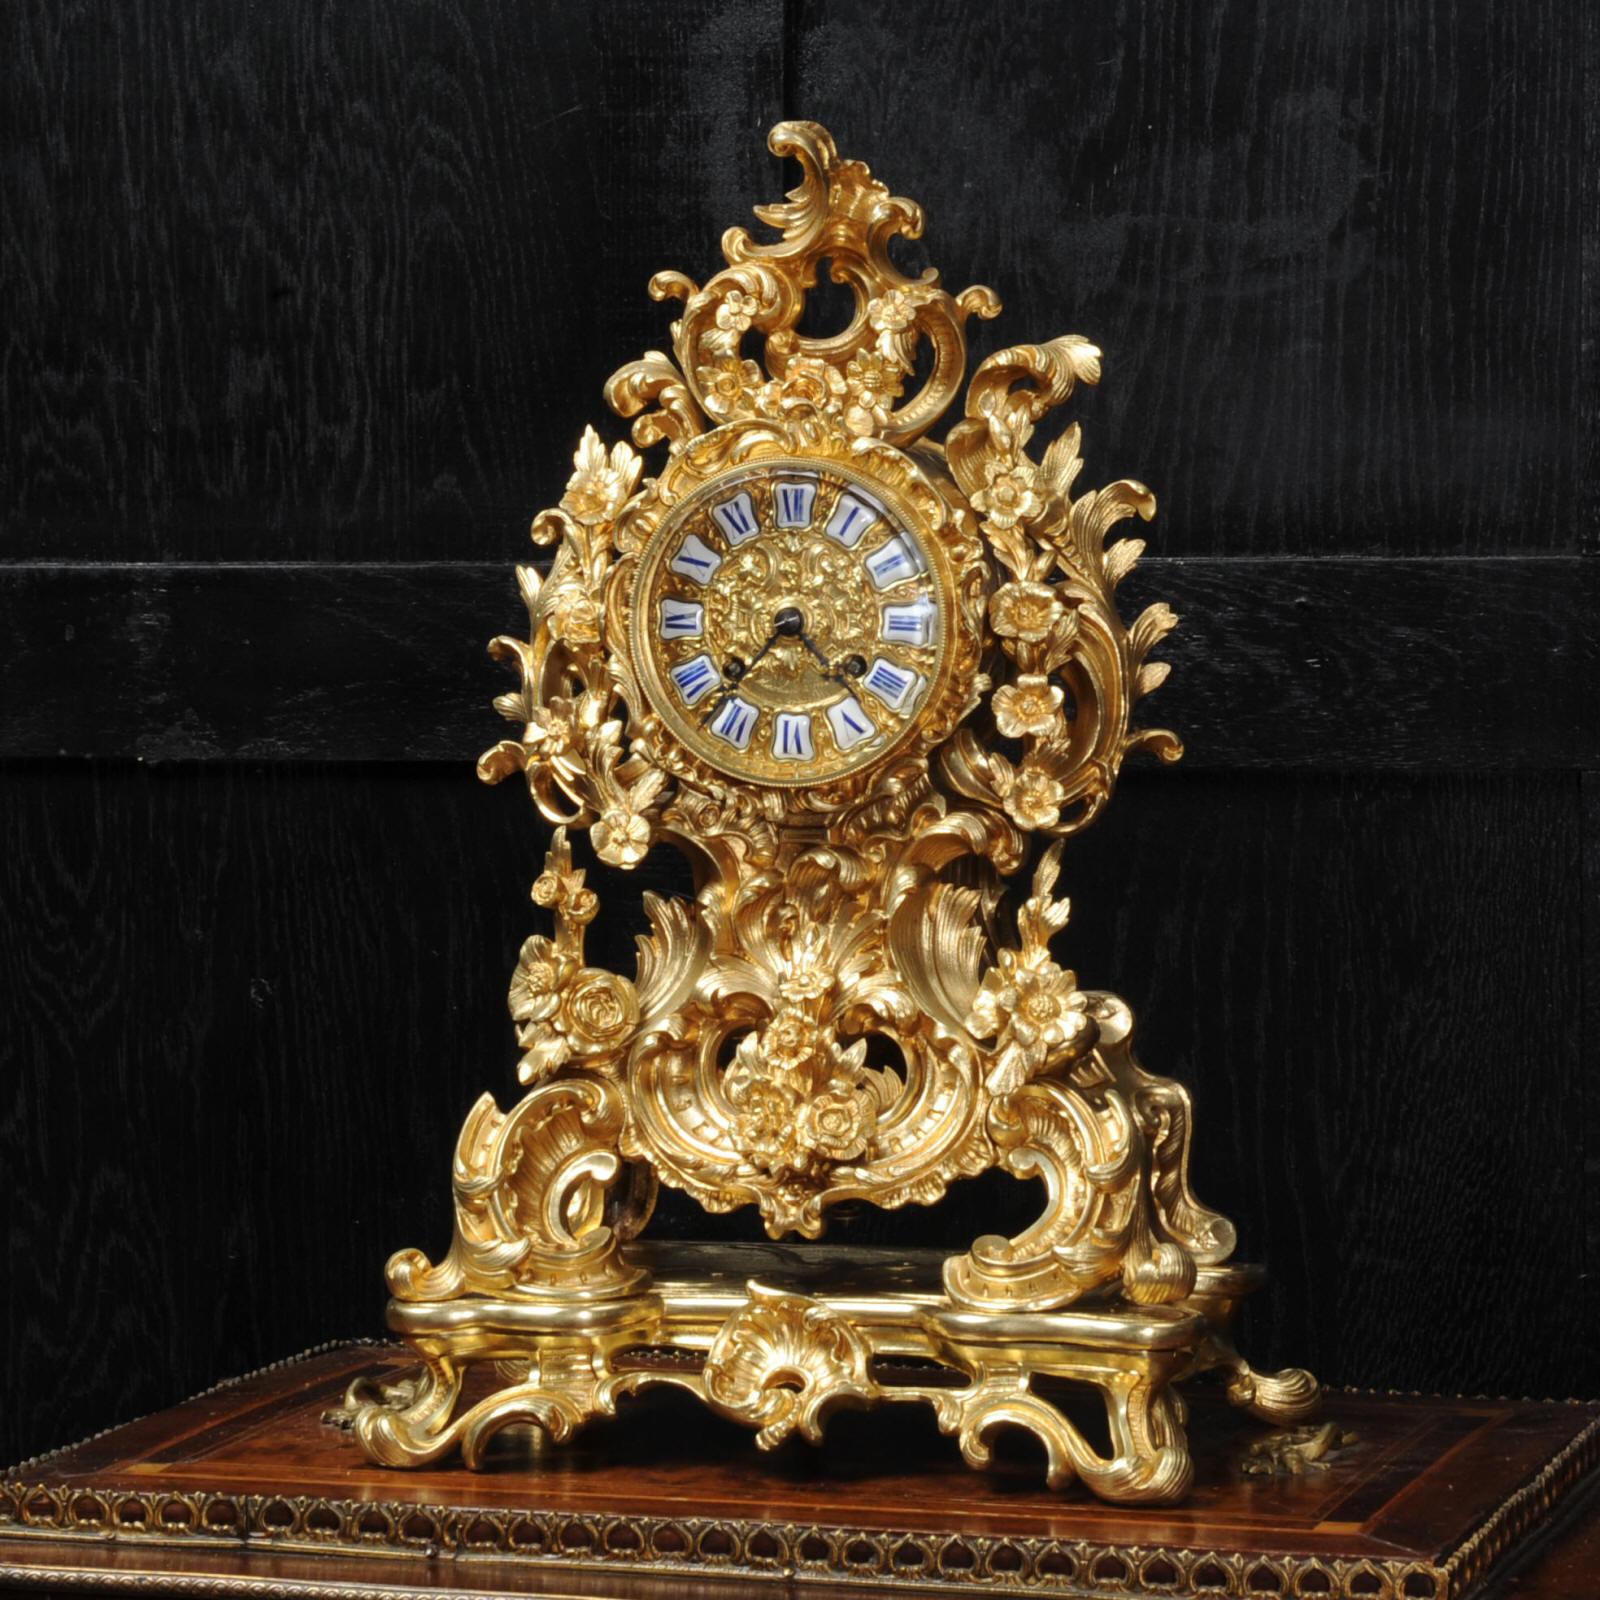 A stunning and early ormolu antique French clock by Japy Freres and retailed by Marshall et Fils of Paris. Dating from circa 1840, it is beautifully modelled in finely gilded bronze, waisted shape formed of scrolling leaves and decorated with